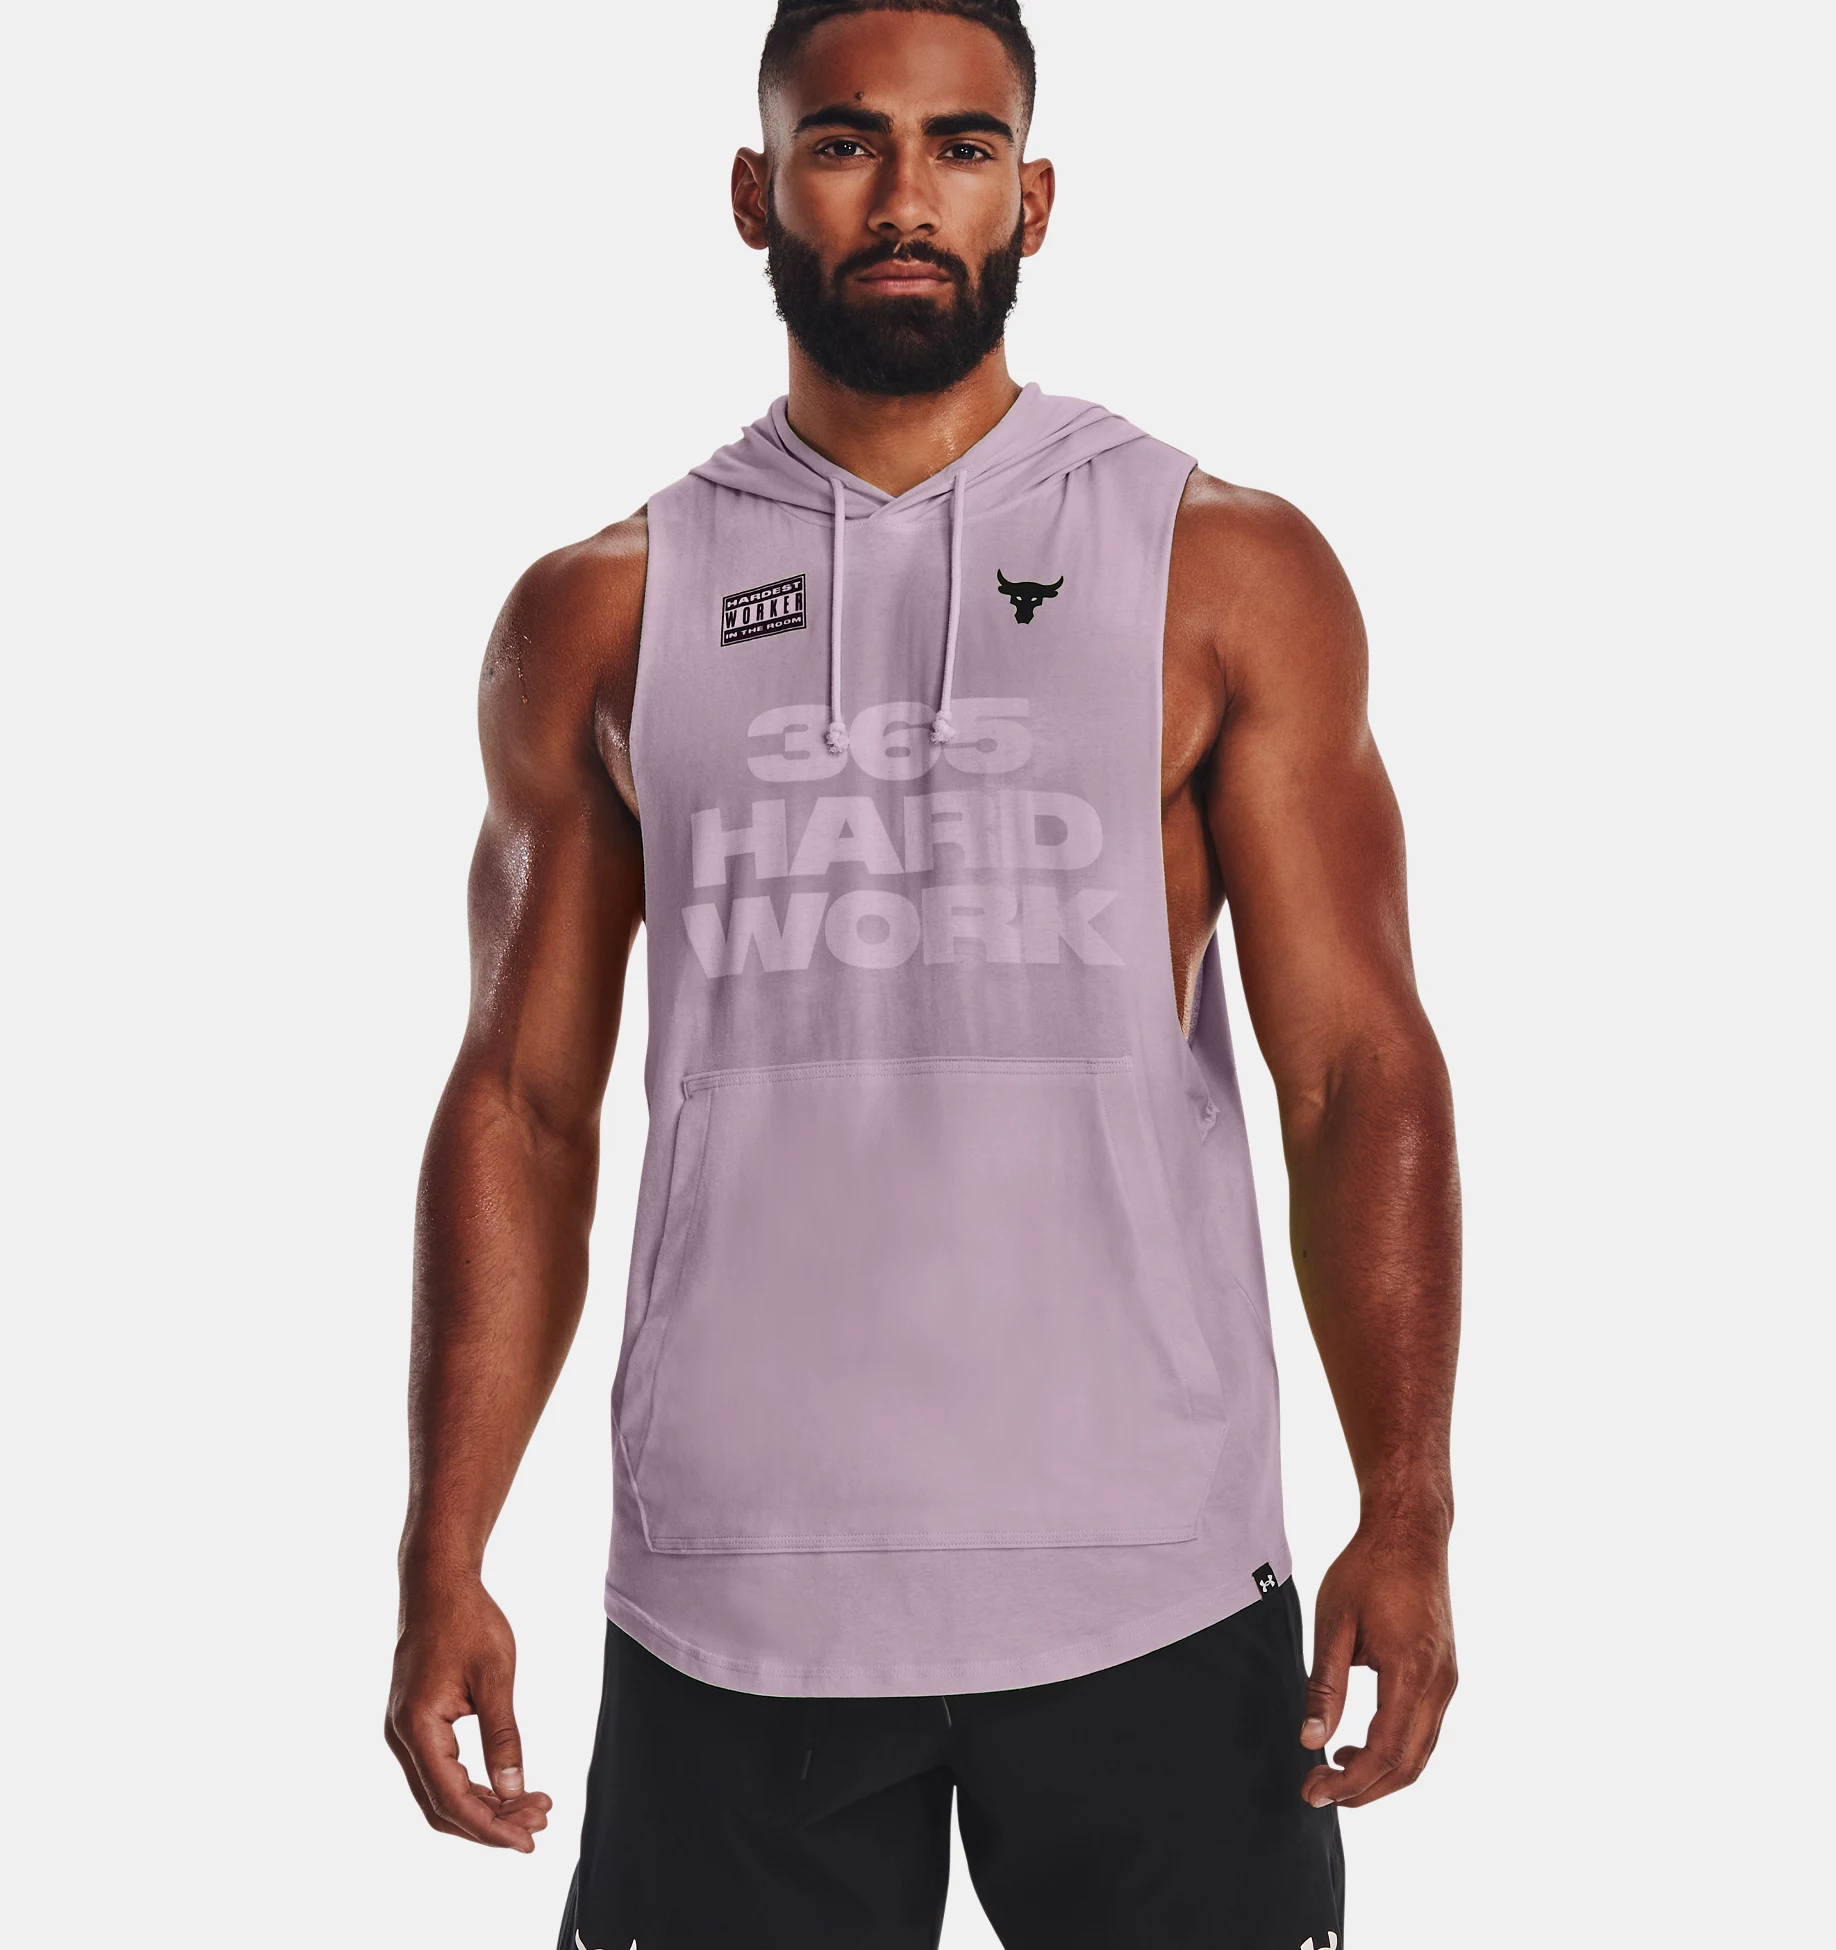 Under Armor Tank Top Project Rock Review Show Your Work